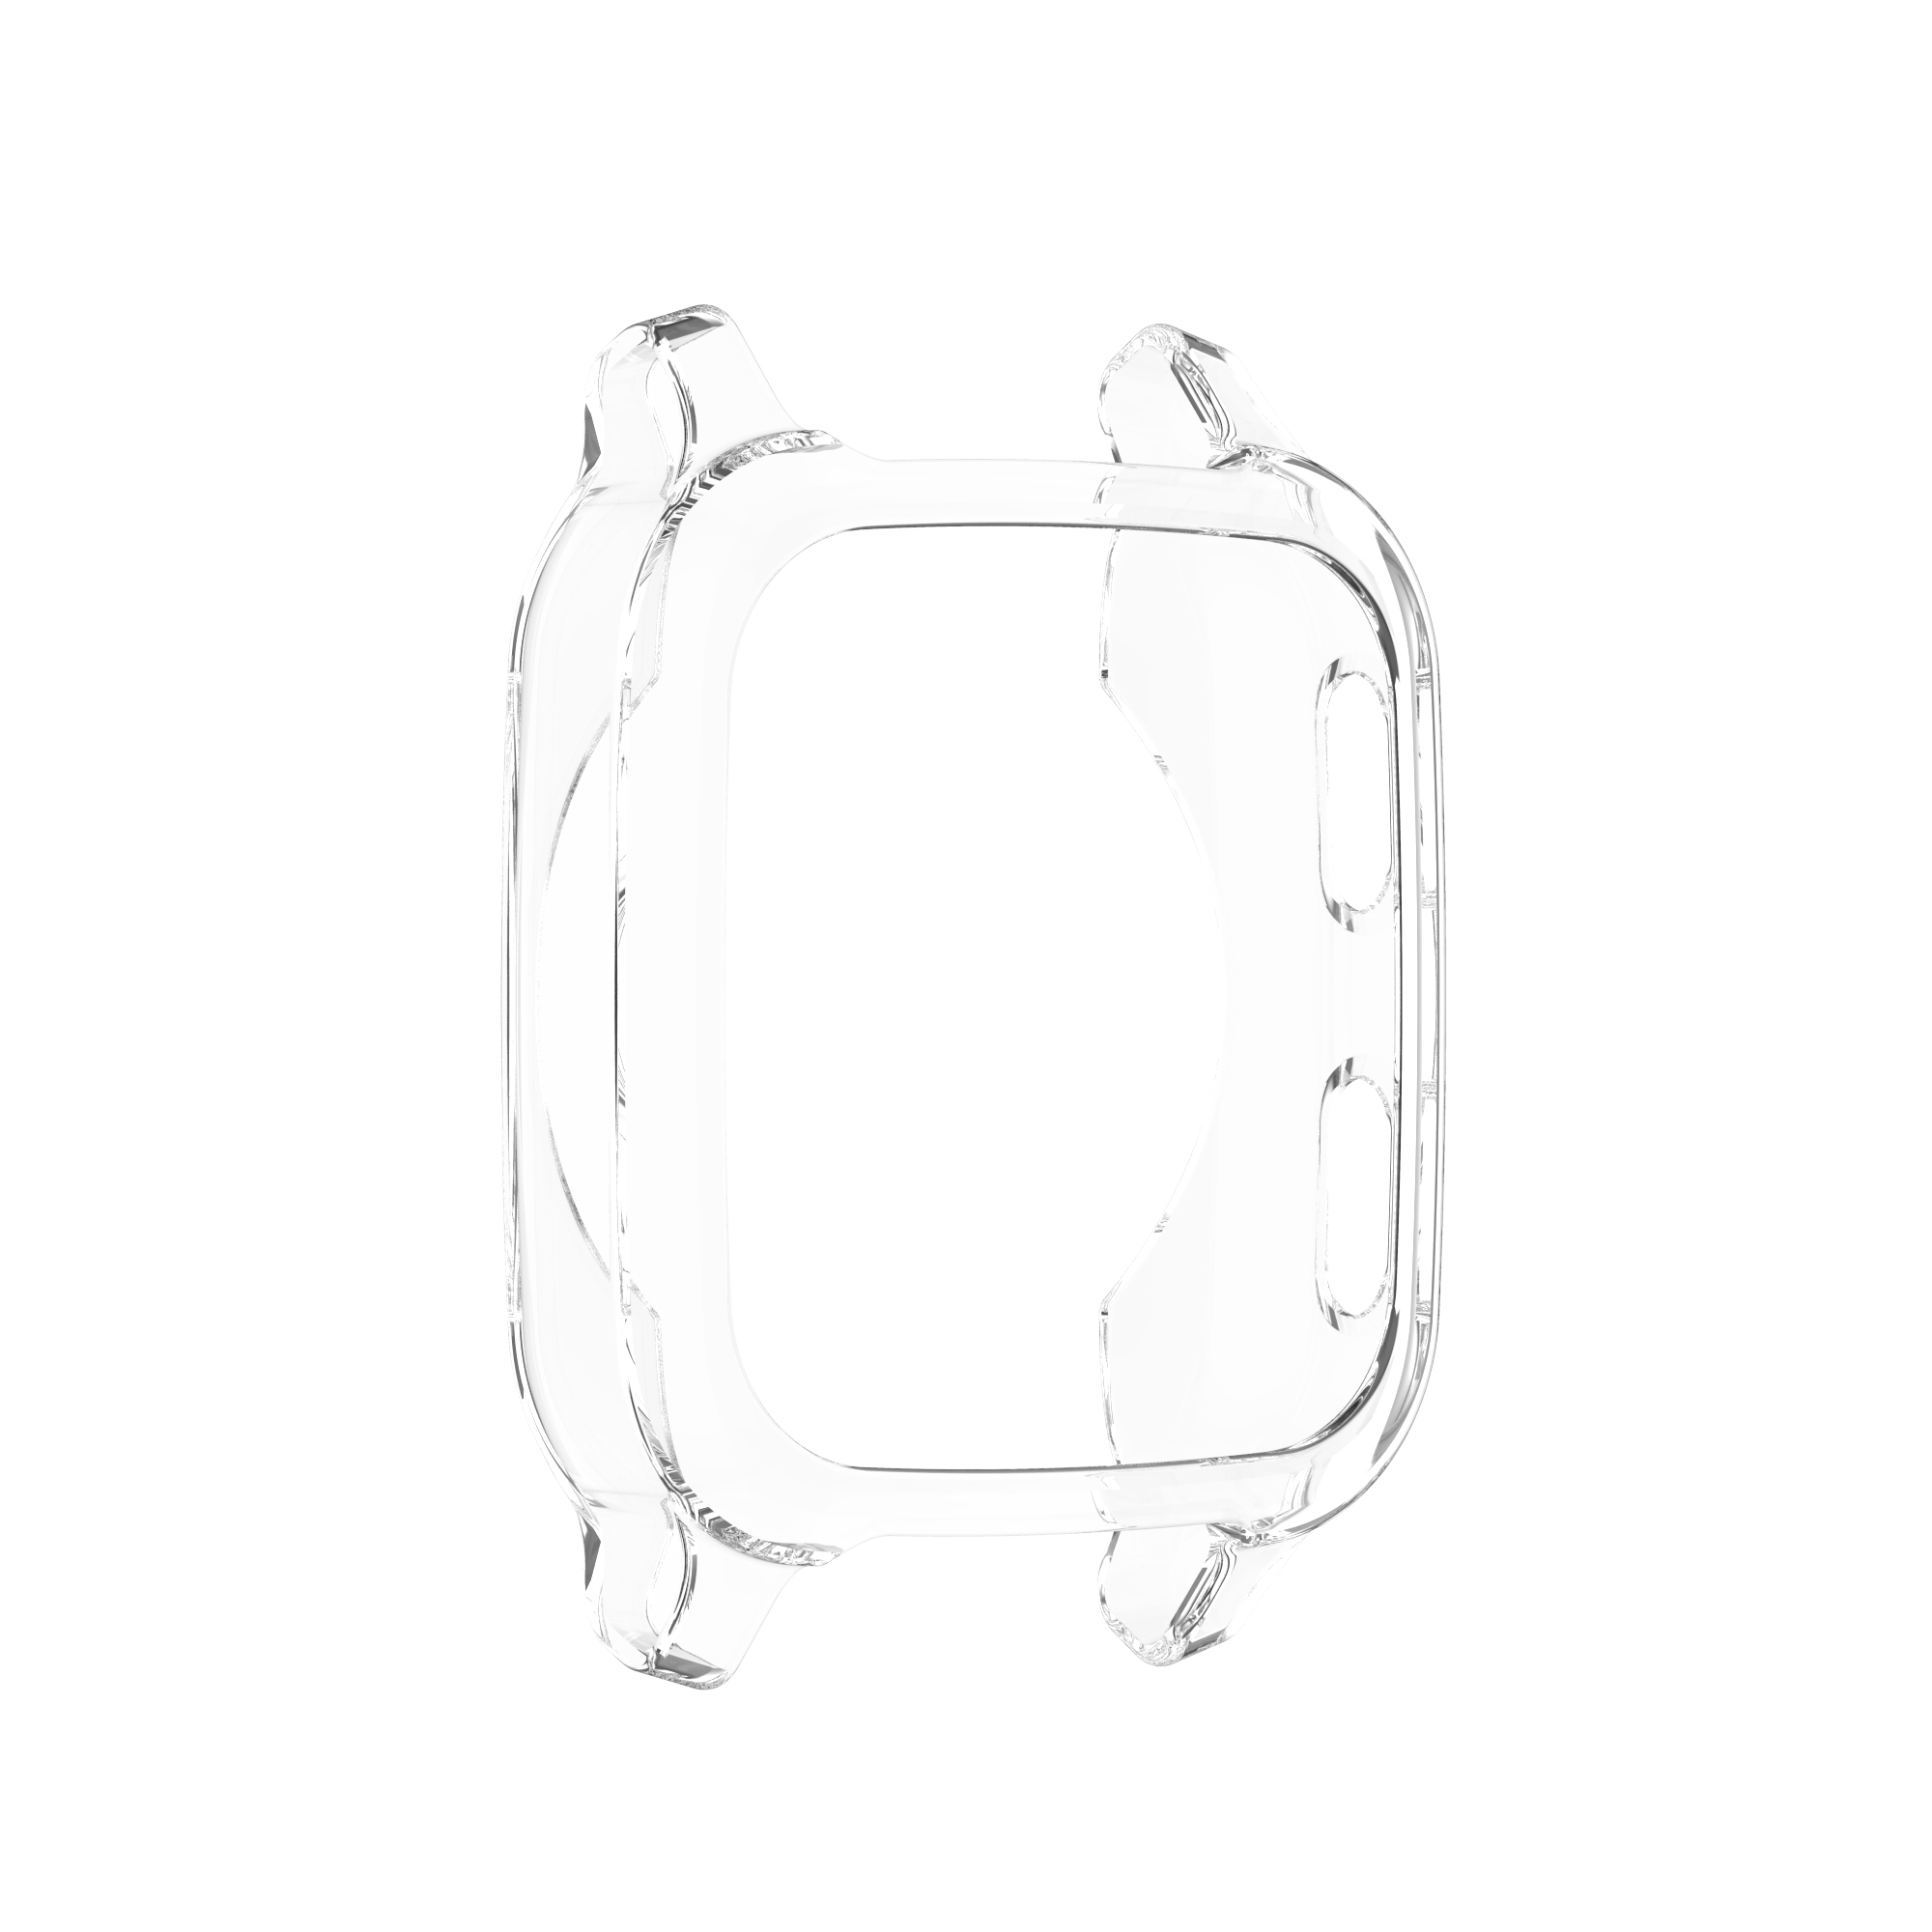 Bakeey-TPU-Transparent-Half-pack-Watch-Case-Cover-Watch-Shell-Protector-For-Garmin-Venu-sq-1791985-6